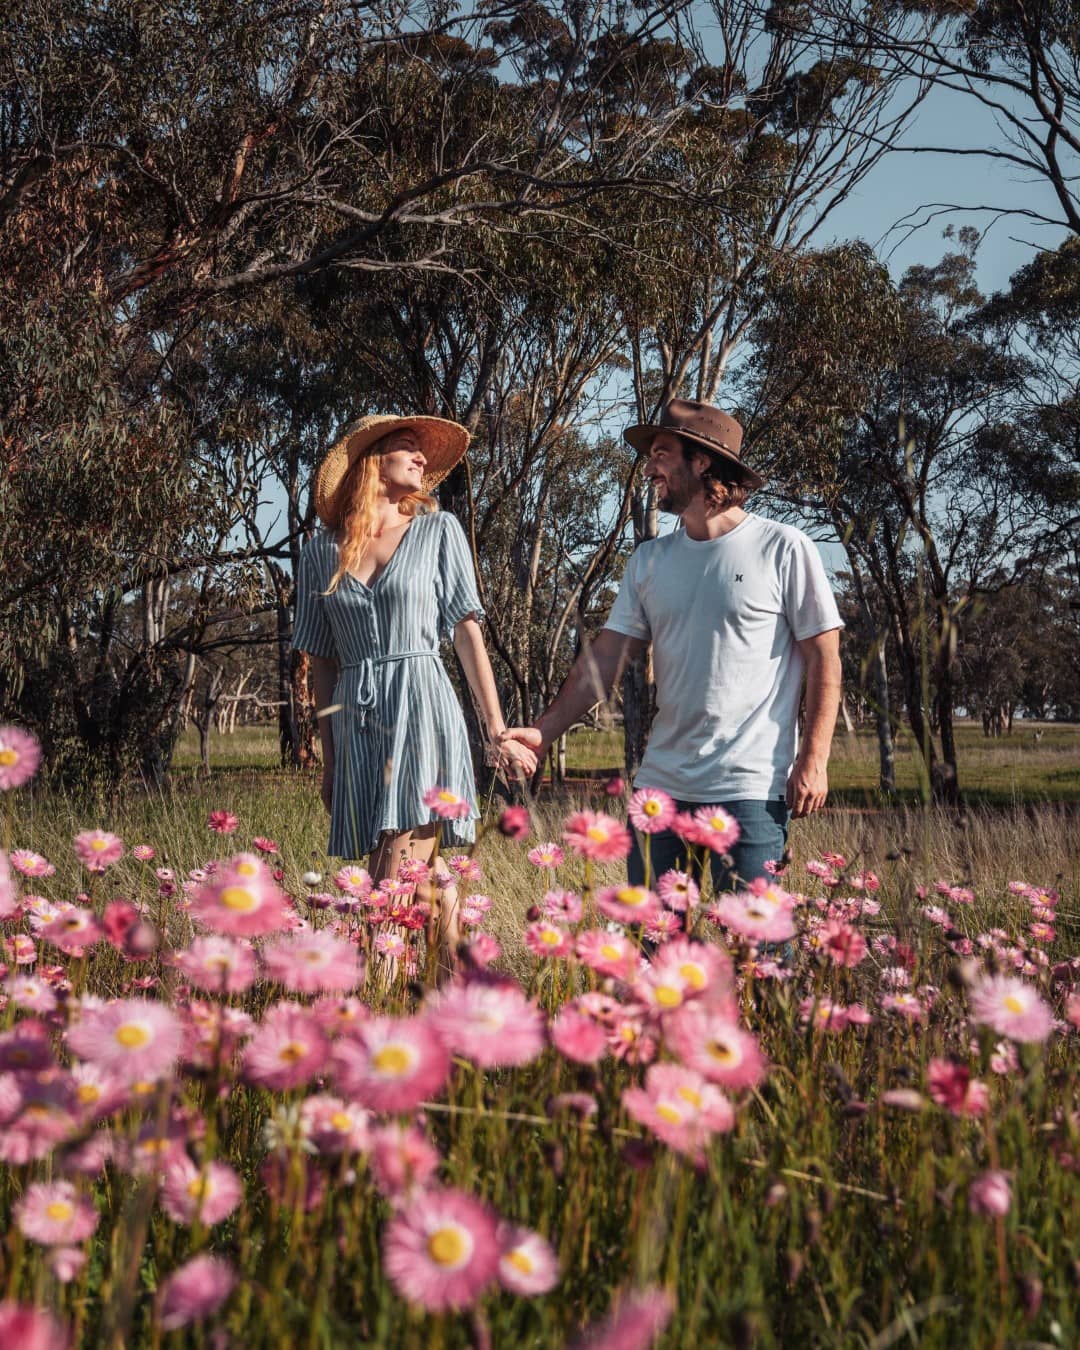 Chris and Beck of Salt and Charcoal hold hands and wander through a field of vibrant pink flowers near Perth, Western Australia.